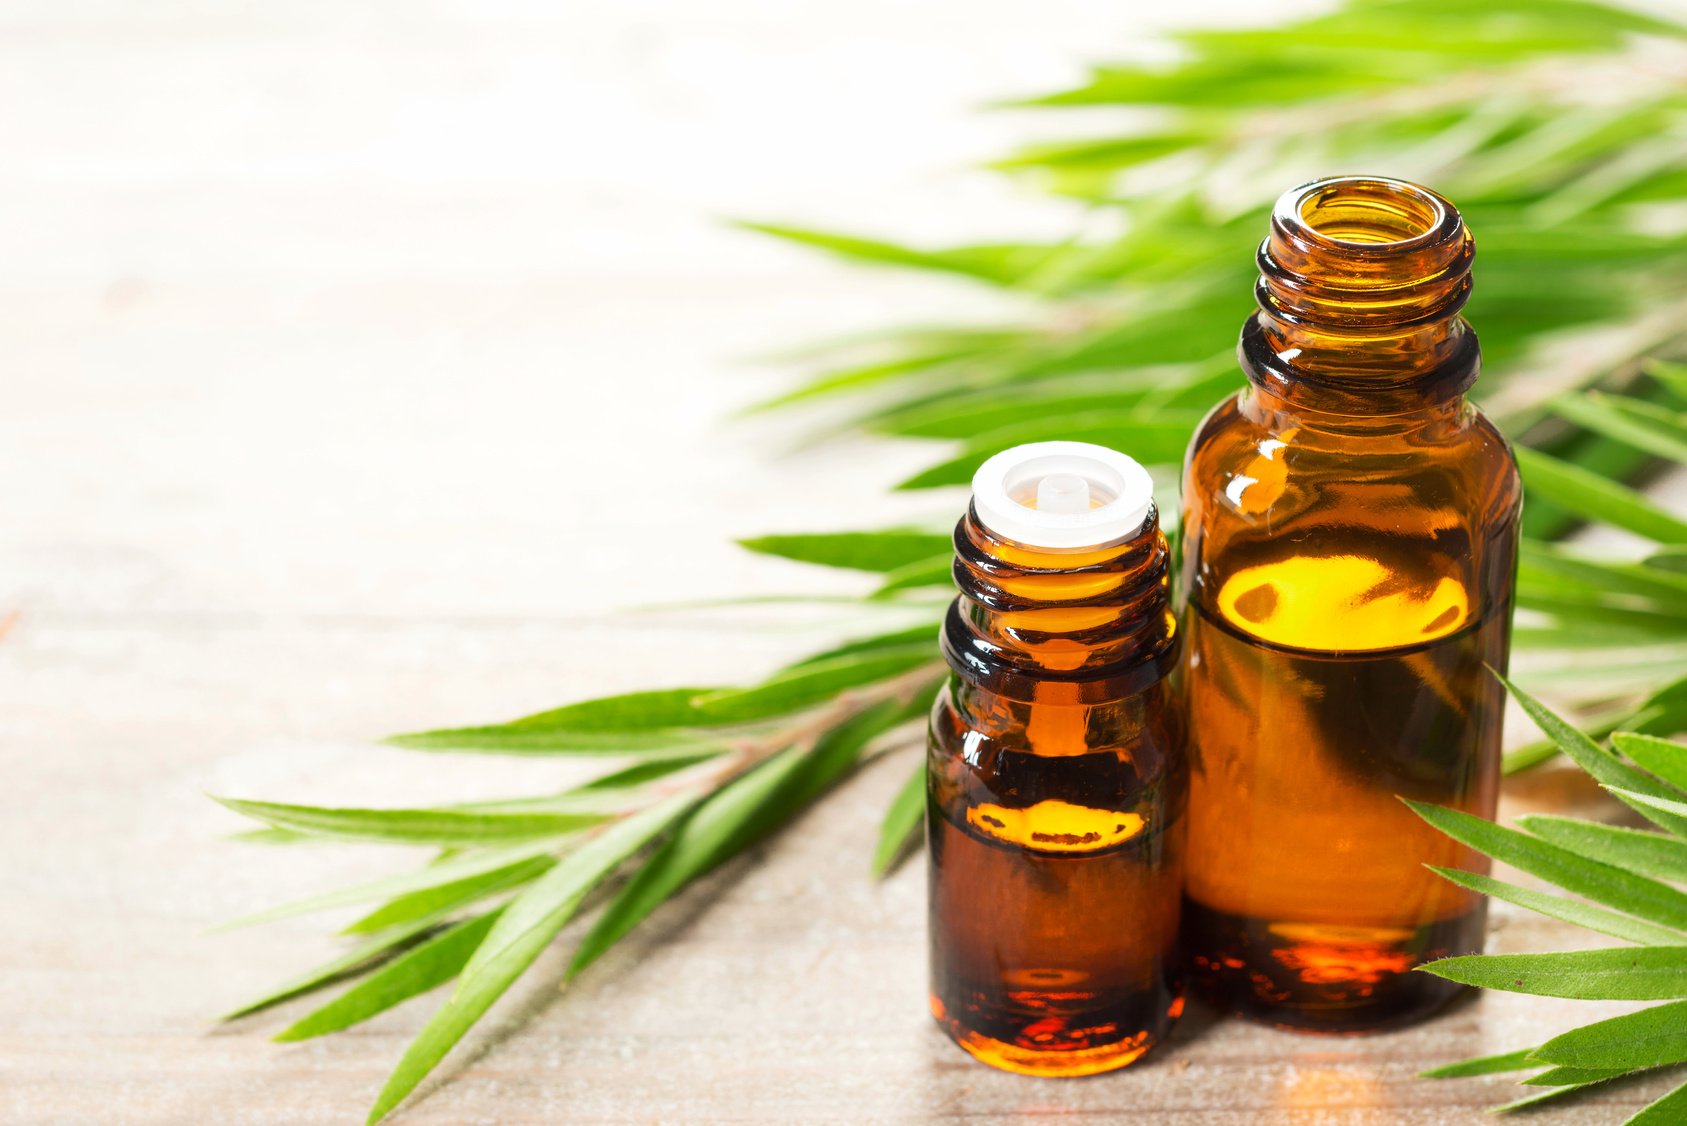 Tea Tree Oil Market is to Grow at 5.4% CAGR by 2024 Globally